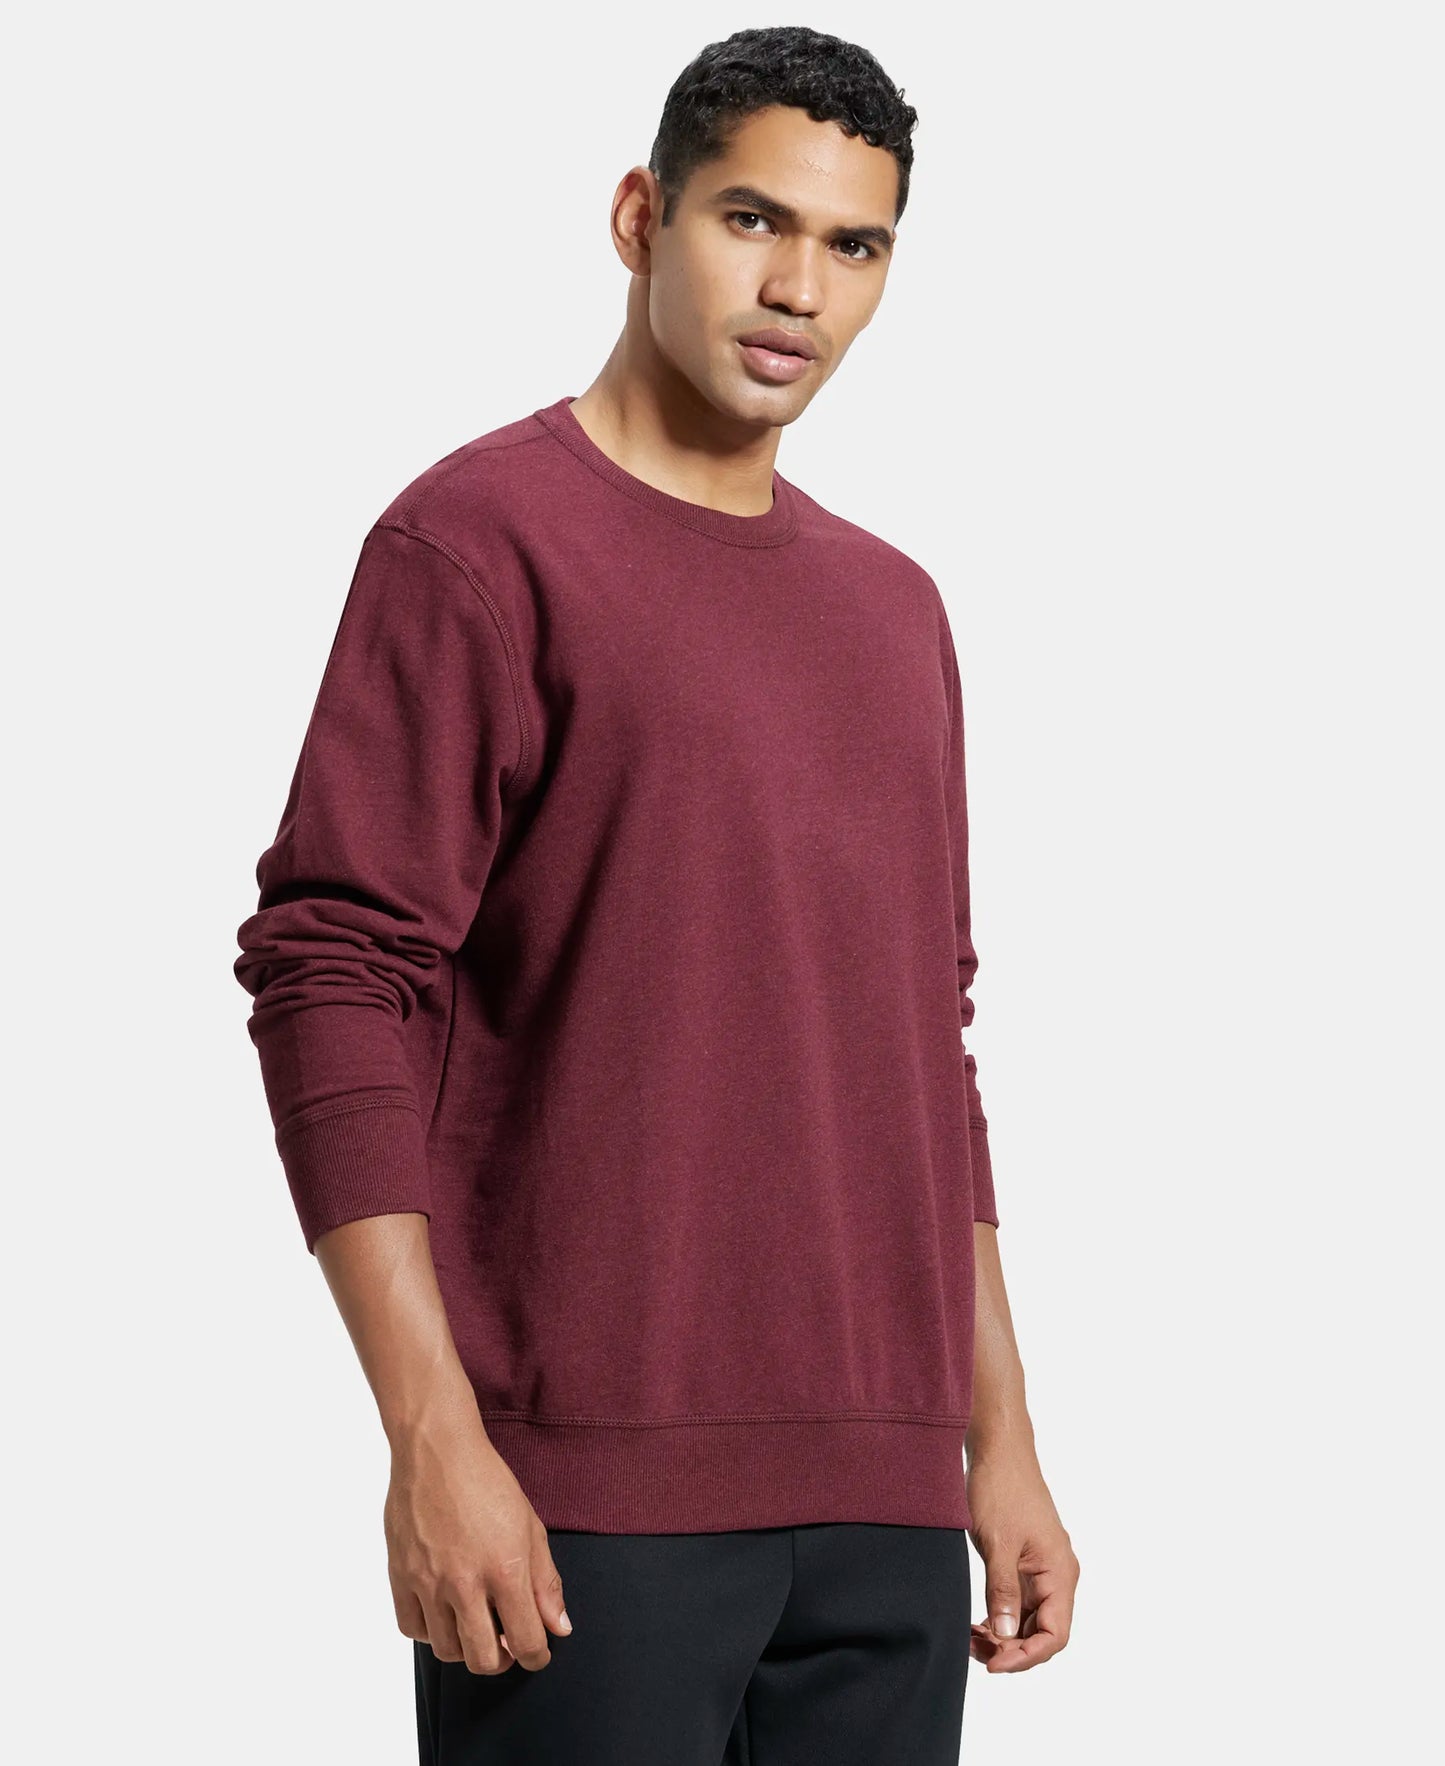 Super Combed Cotton French Terry Solid Sweatshirt with Ribbed Cuffs - Burgundy Melange-2